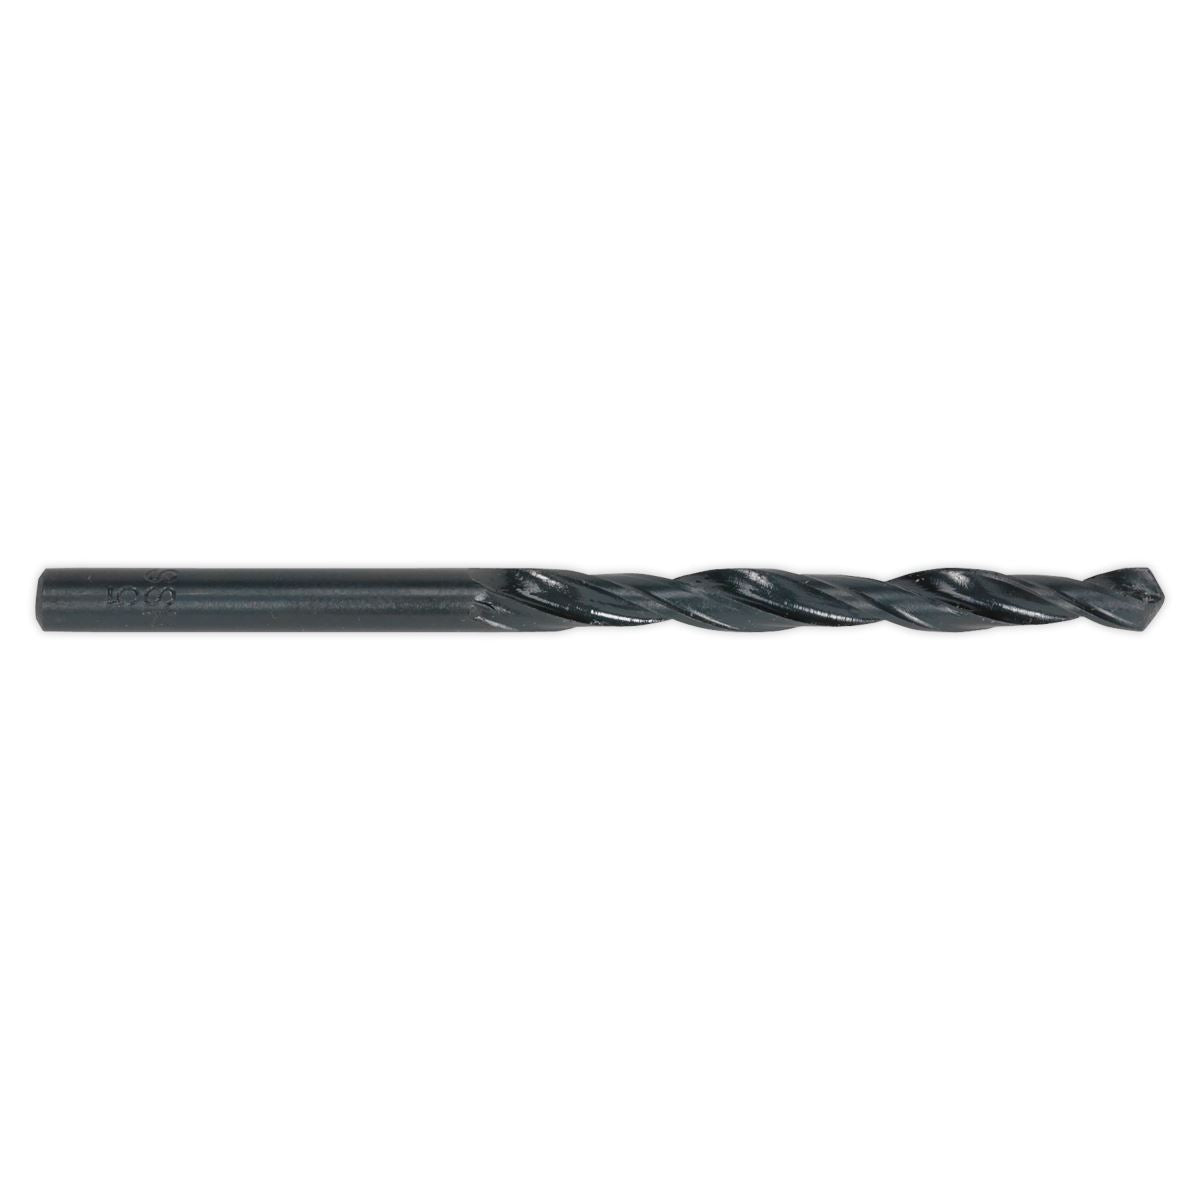 Sealey HSS Roll Forged Drill Bit Ø1/4" Pack of 10